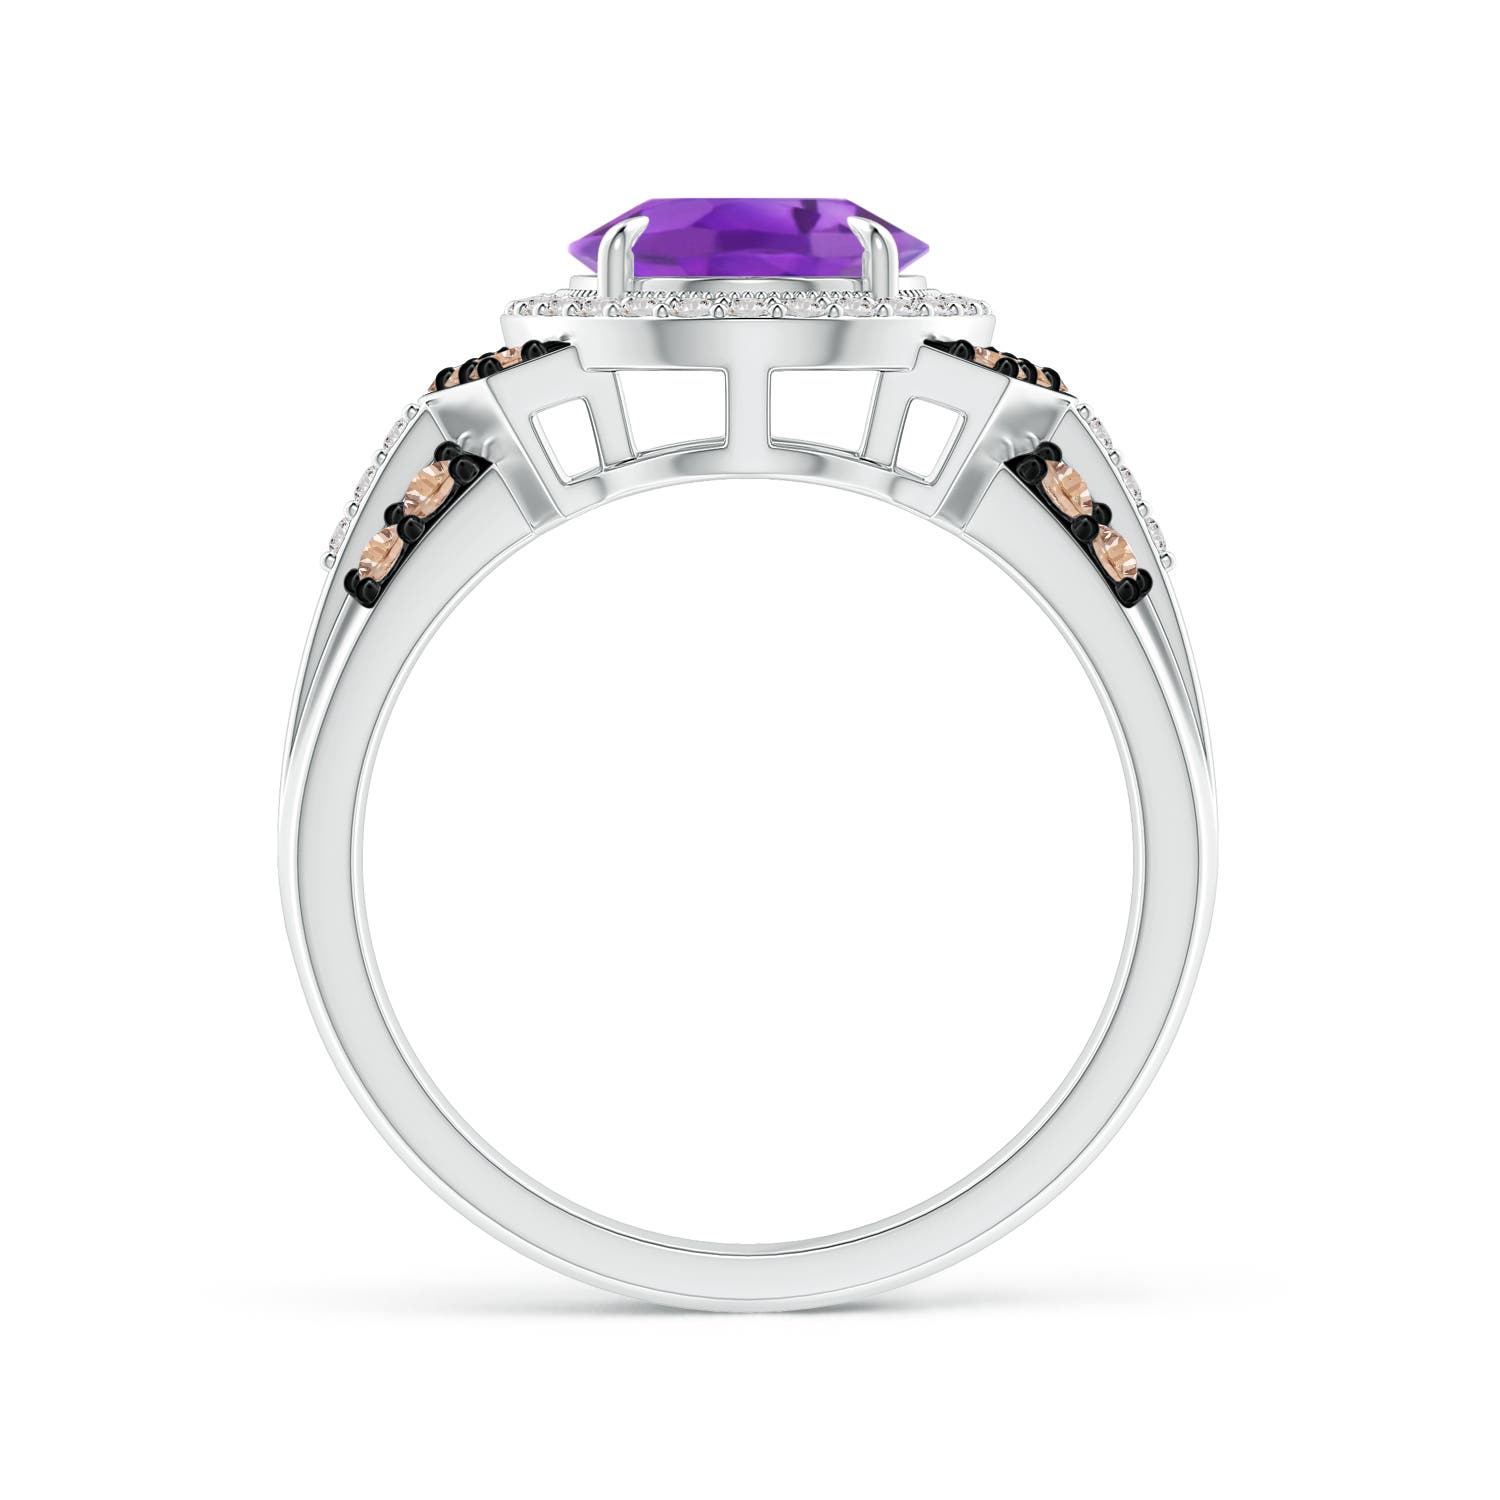 AA - Amethyst / 2.81 CT / 14 KT White Gold